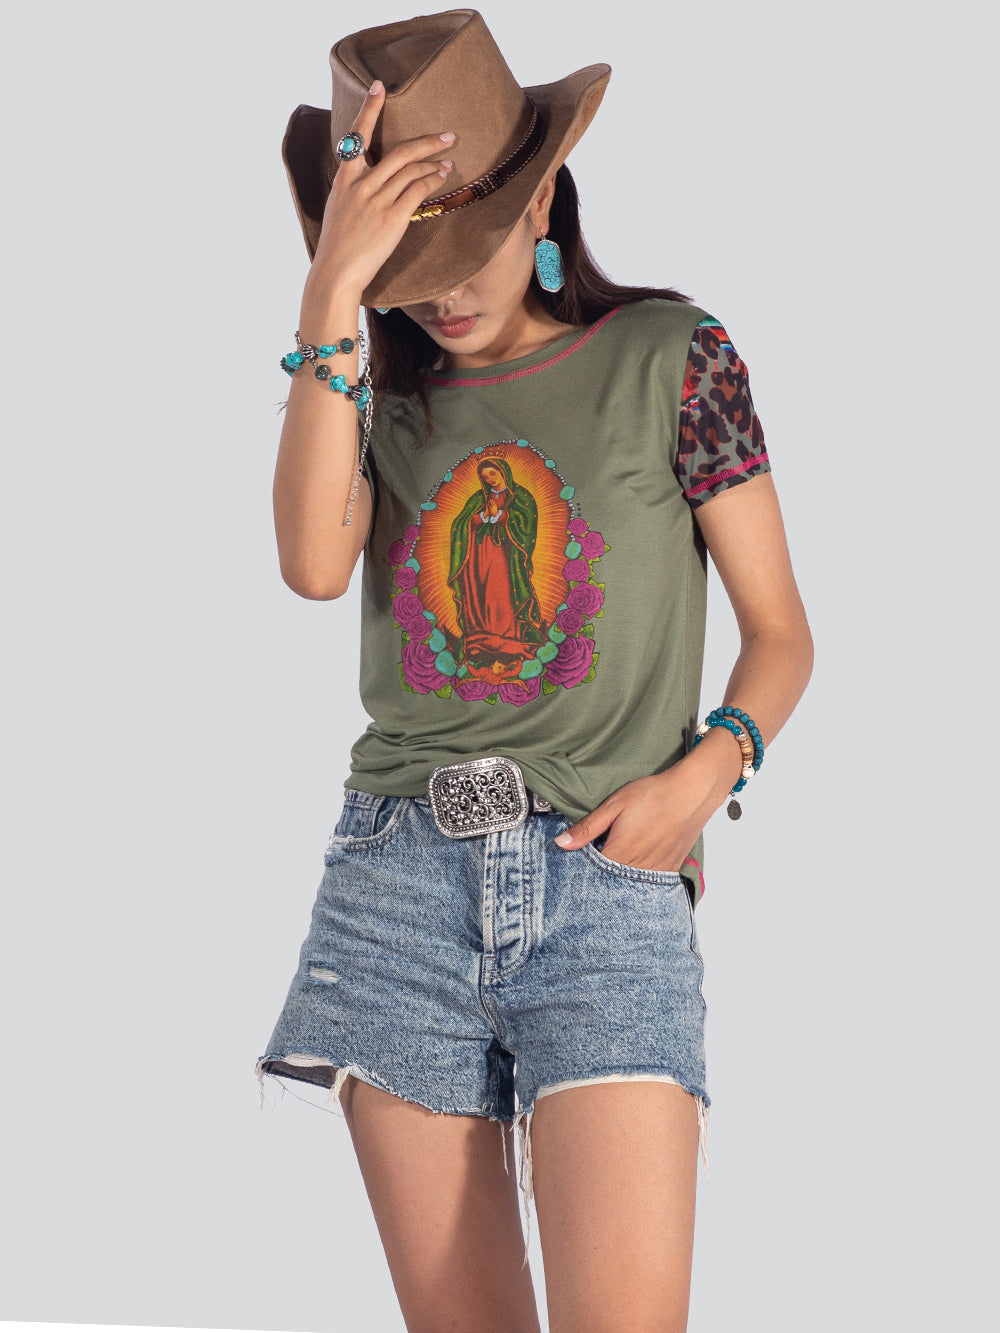 American Bling Our Lady of Guadalupe Women T-Shirt